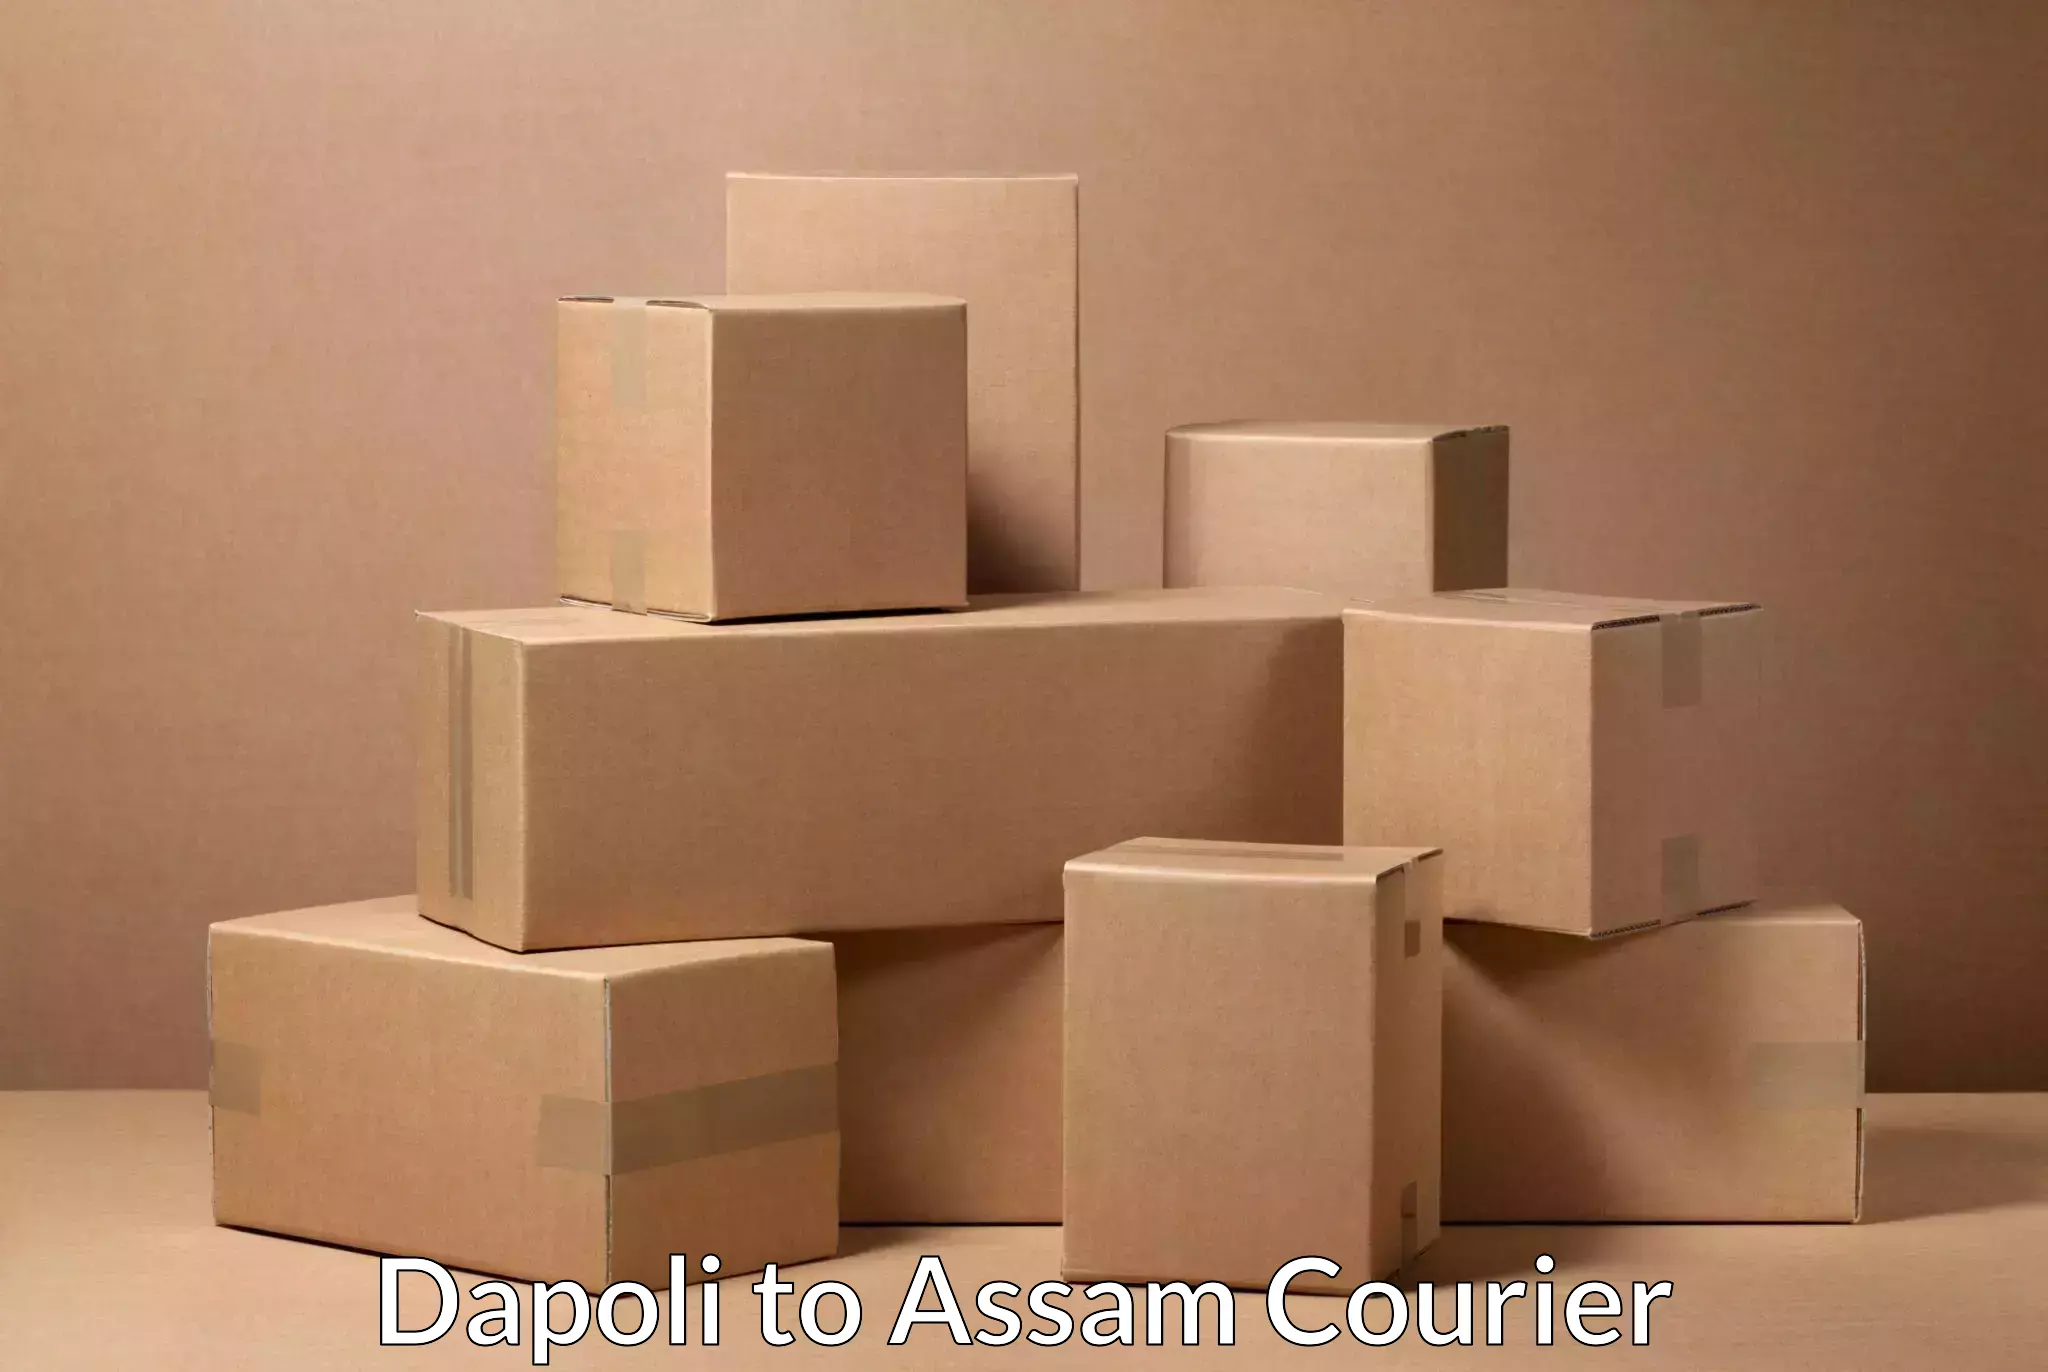 Flexible delivery schedules Dapoli to Kamrup